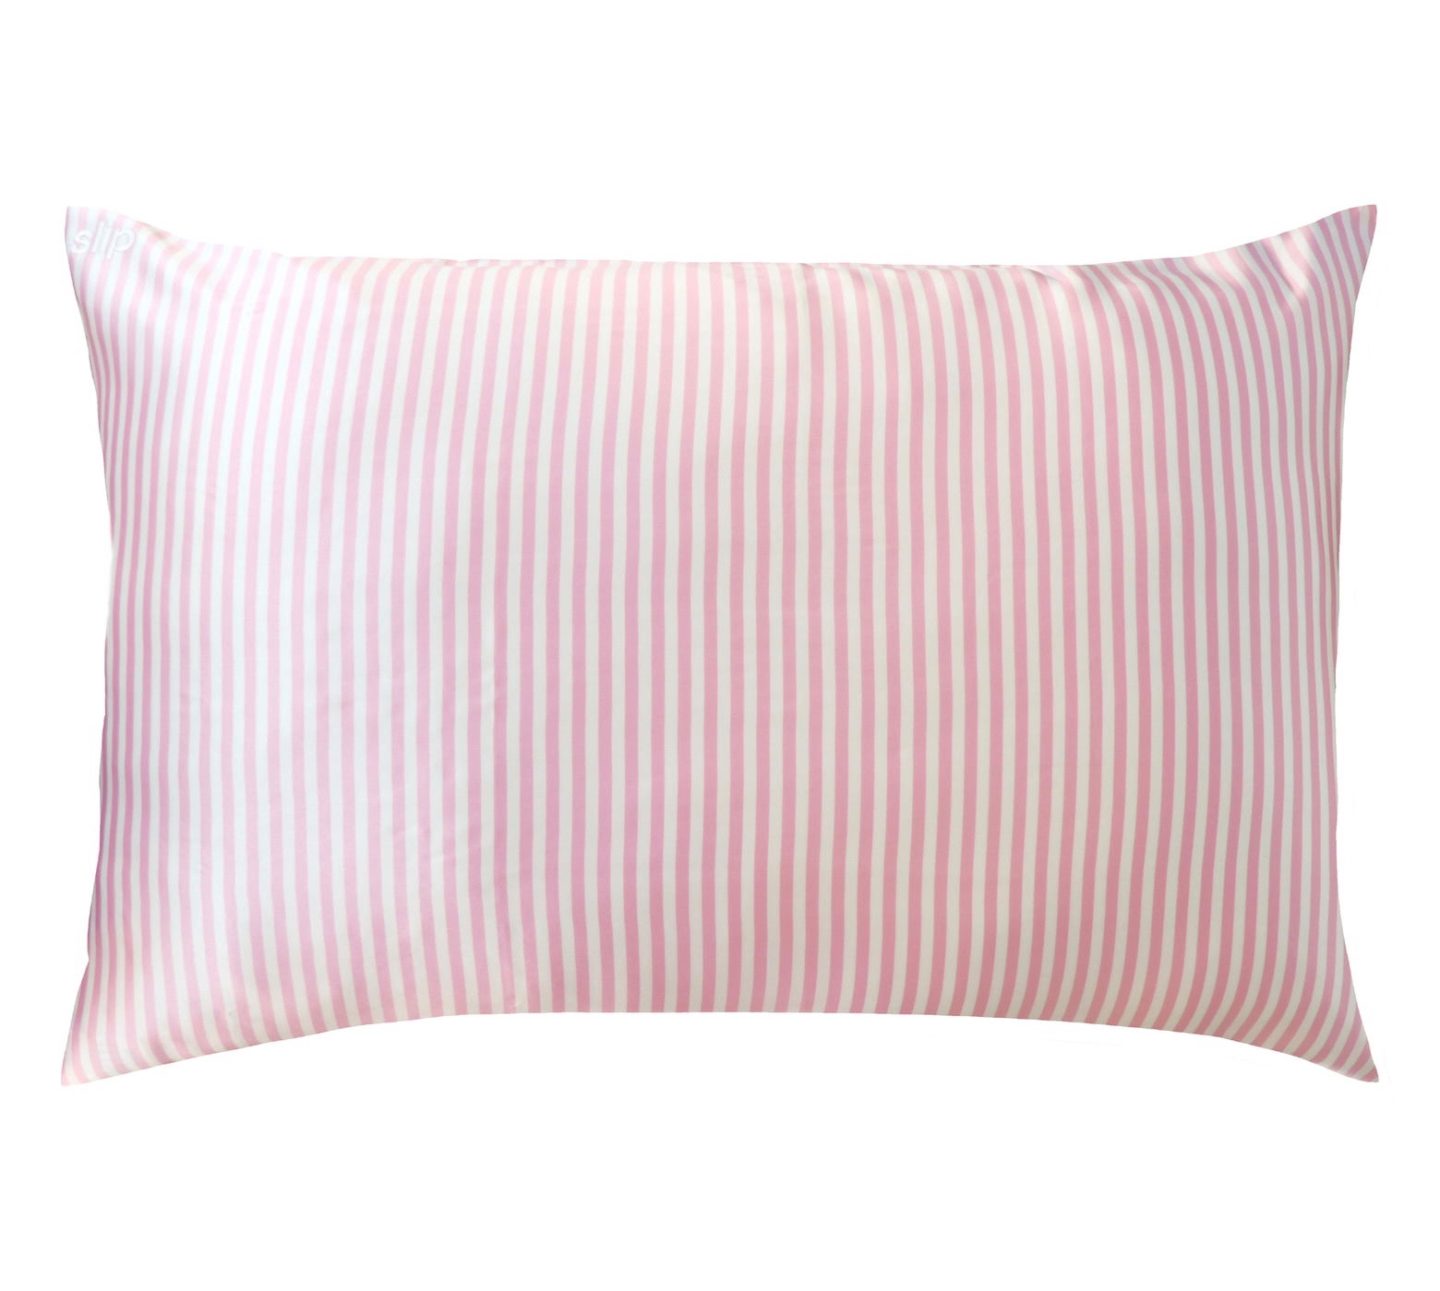 5 Last Minute Mother's Day Gifts - Pure Silk Pillowcase